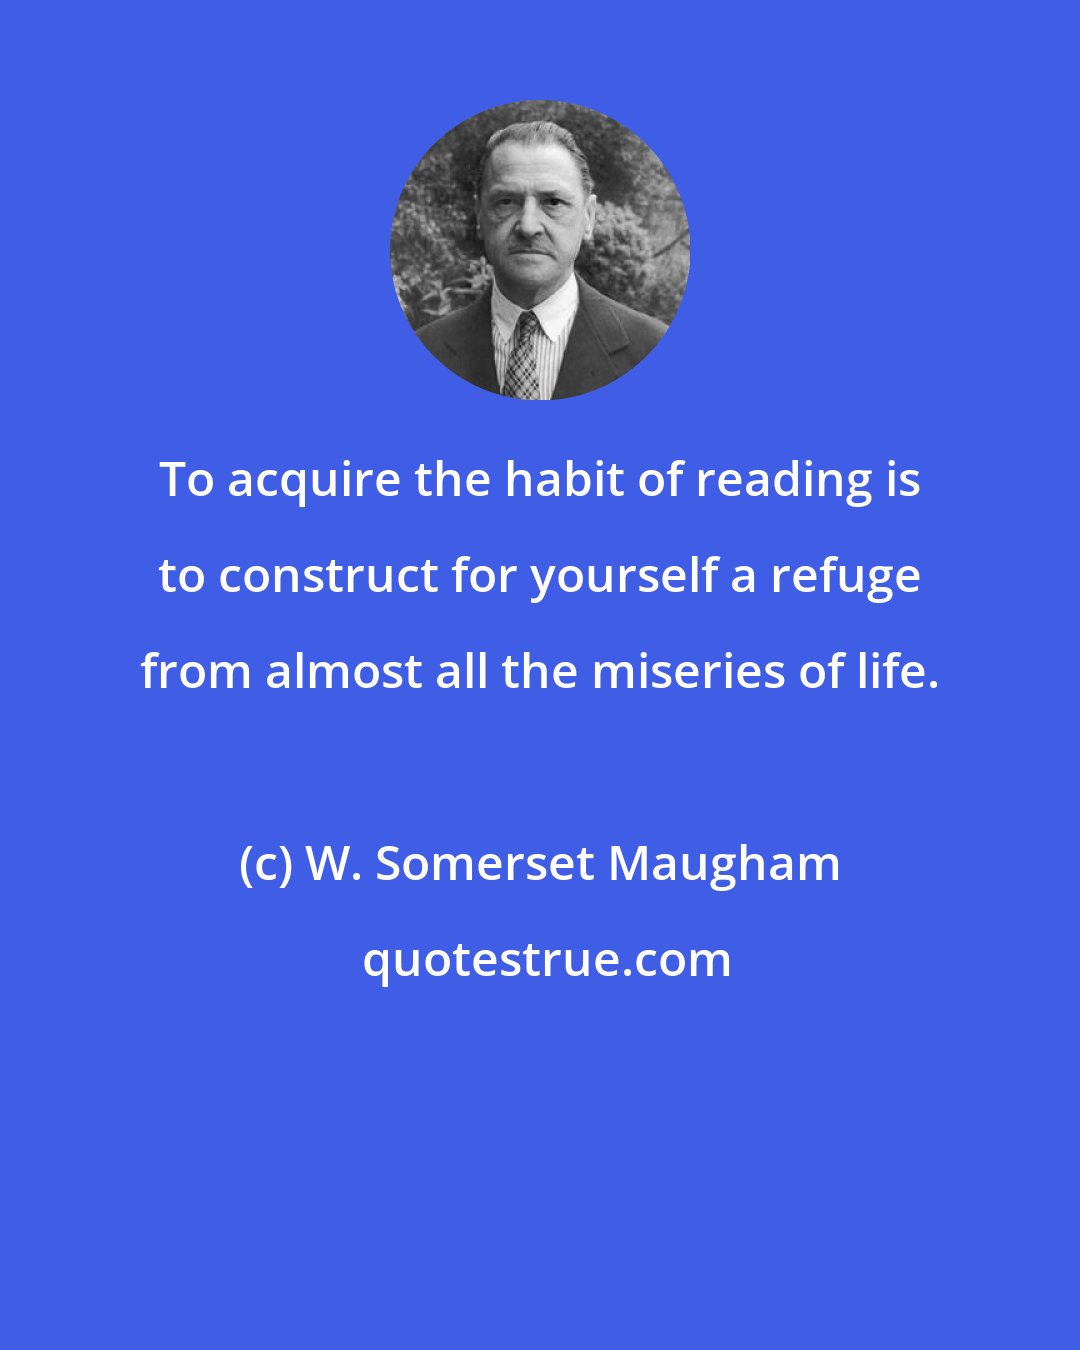 W. Somerset Maugham: To acquire the habit of reading is to construct for yourself a refuge from almost all the miseries of life.